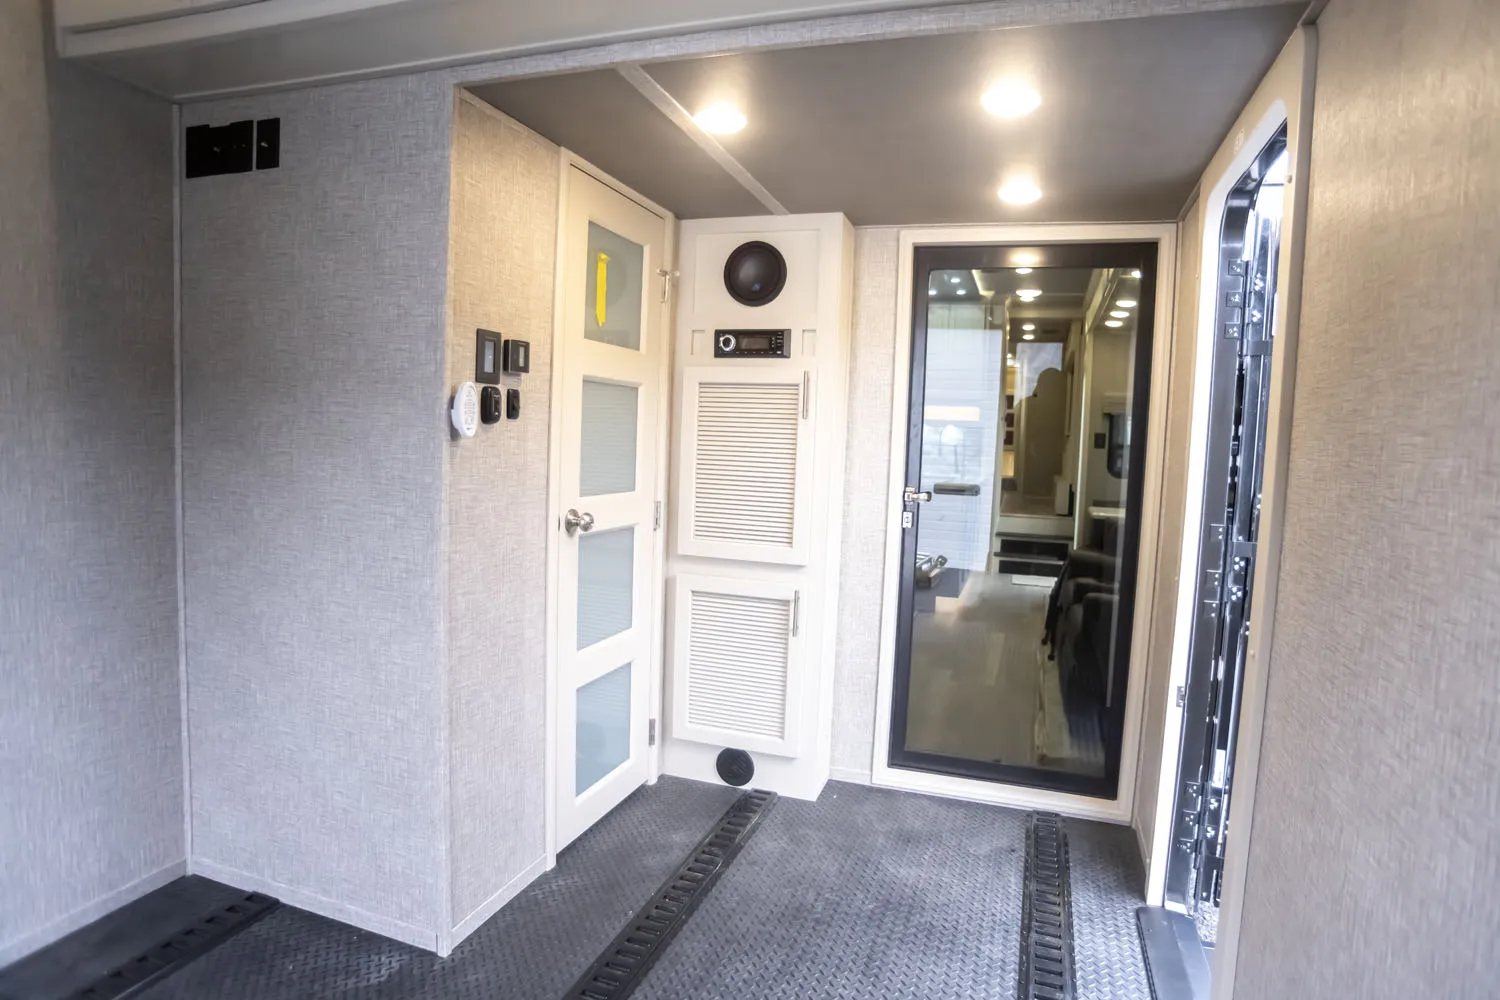 The entrance into the flex garage space on a Luxe 5th Wheel Toy Hauler.